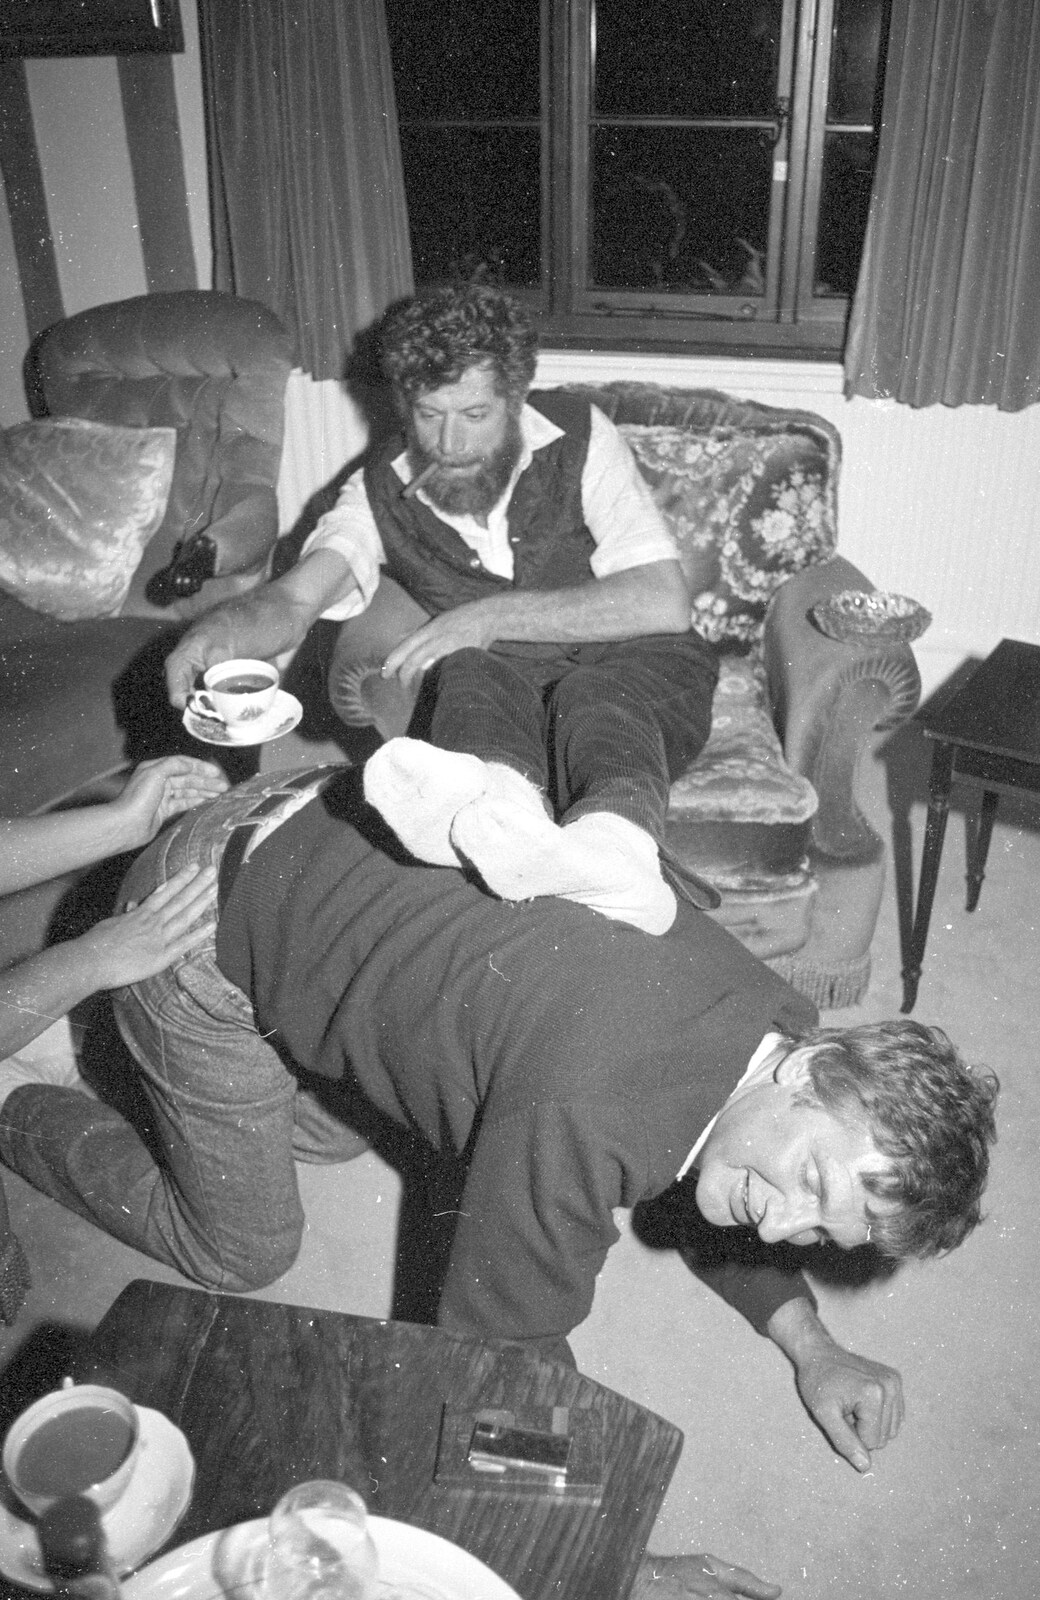 Geoff acts as a foot stool for Mike from Cider Making in Black and White, Stuston, Suffolk - 11th October 1992